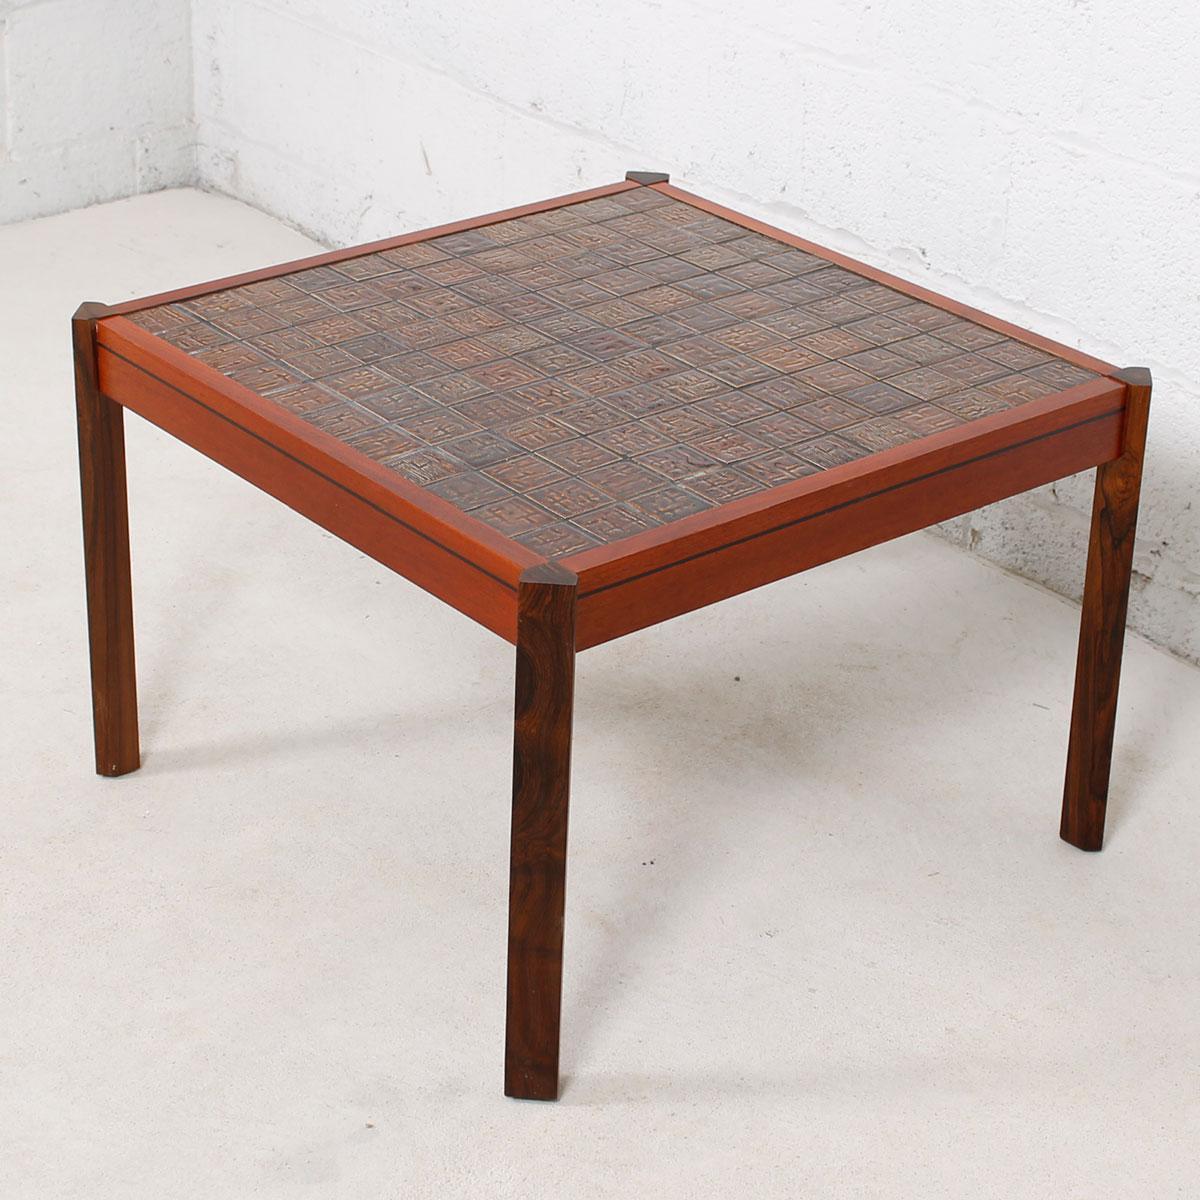 Danish Modern Accent Table with Tile Top In Good Condition For Sale In Kensington, MD